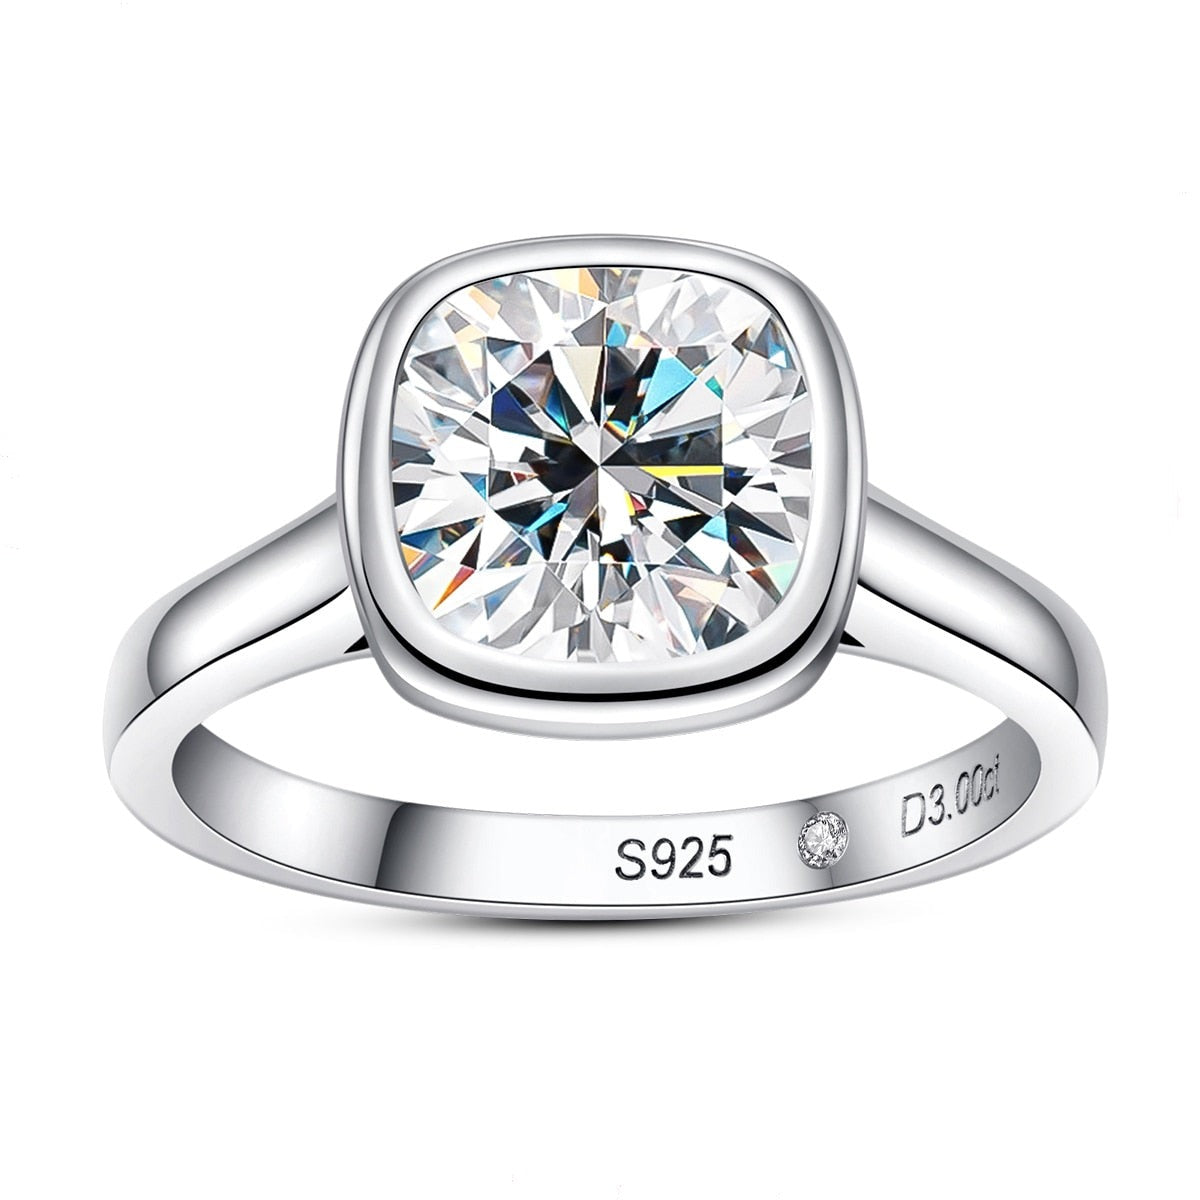 A sterling silver ring with a 3CT cushion cut moissanite gem bezel set.